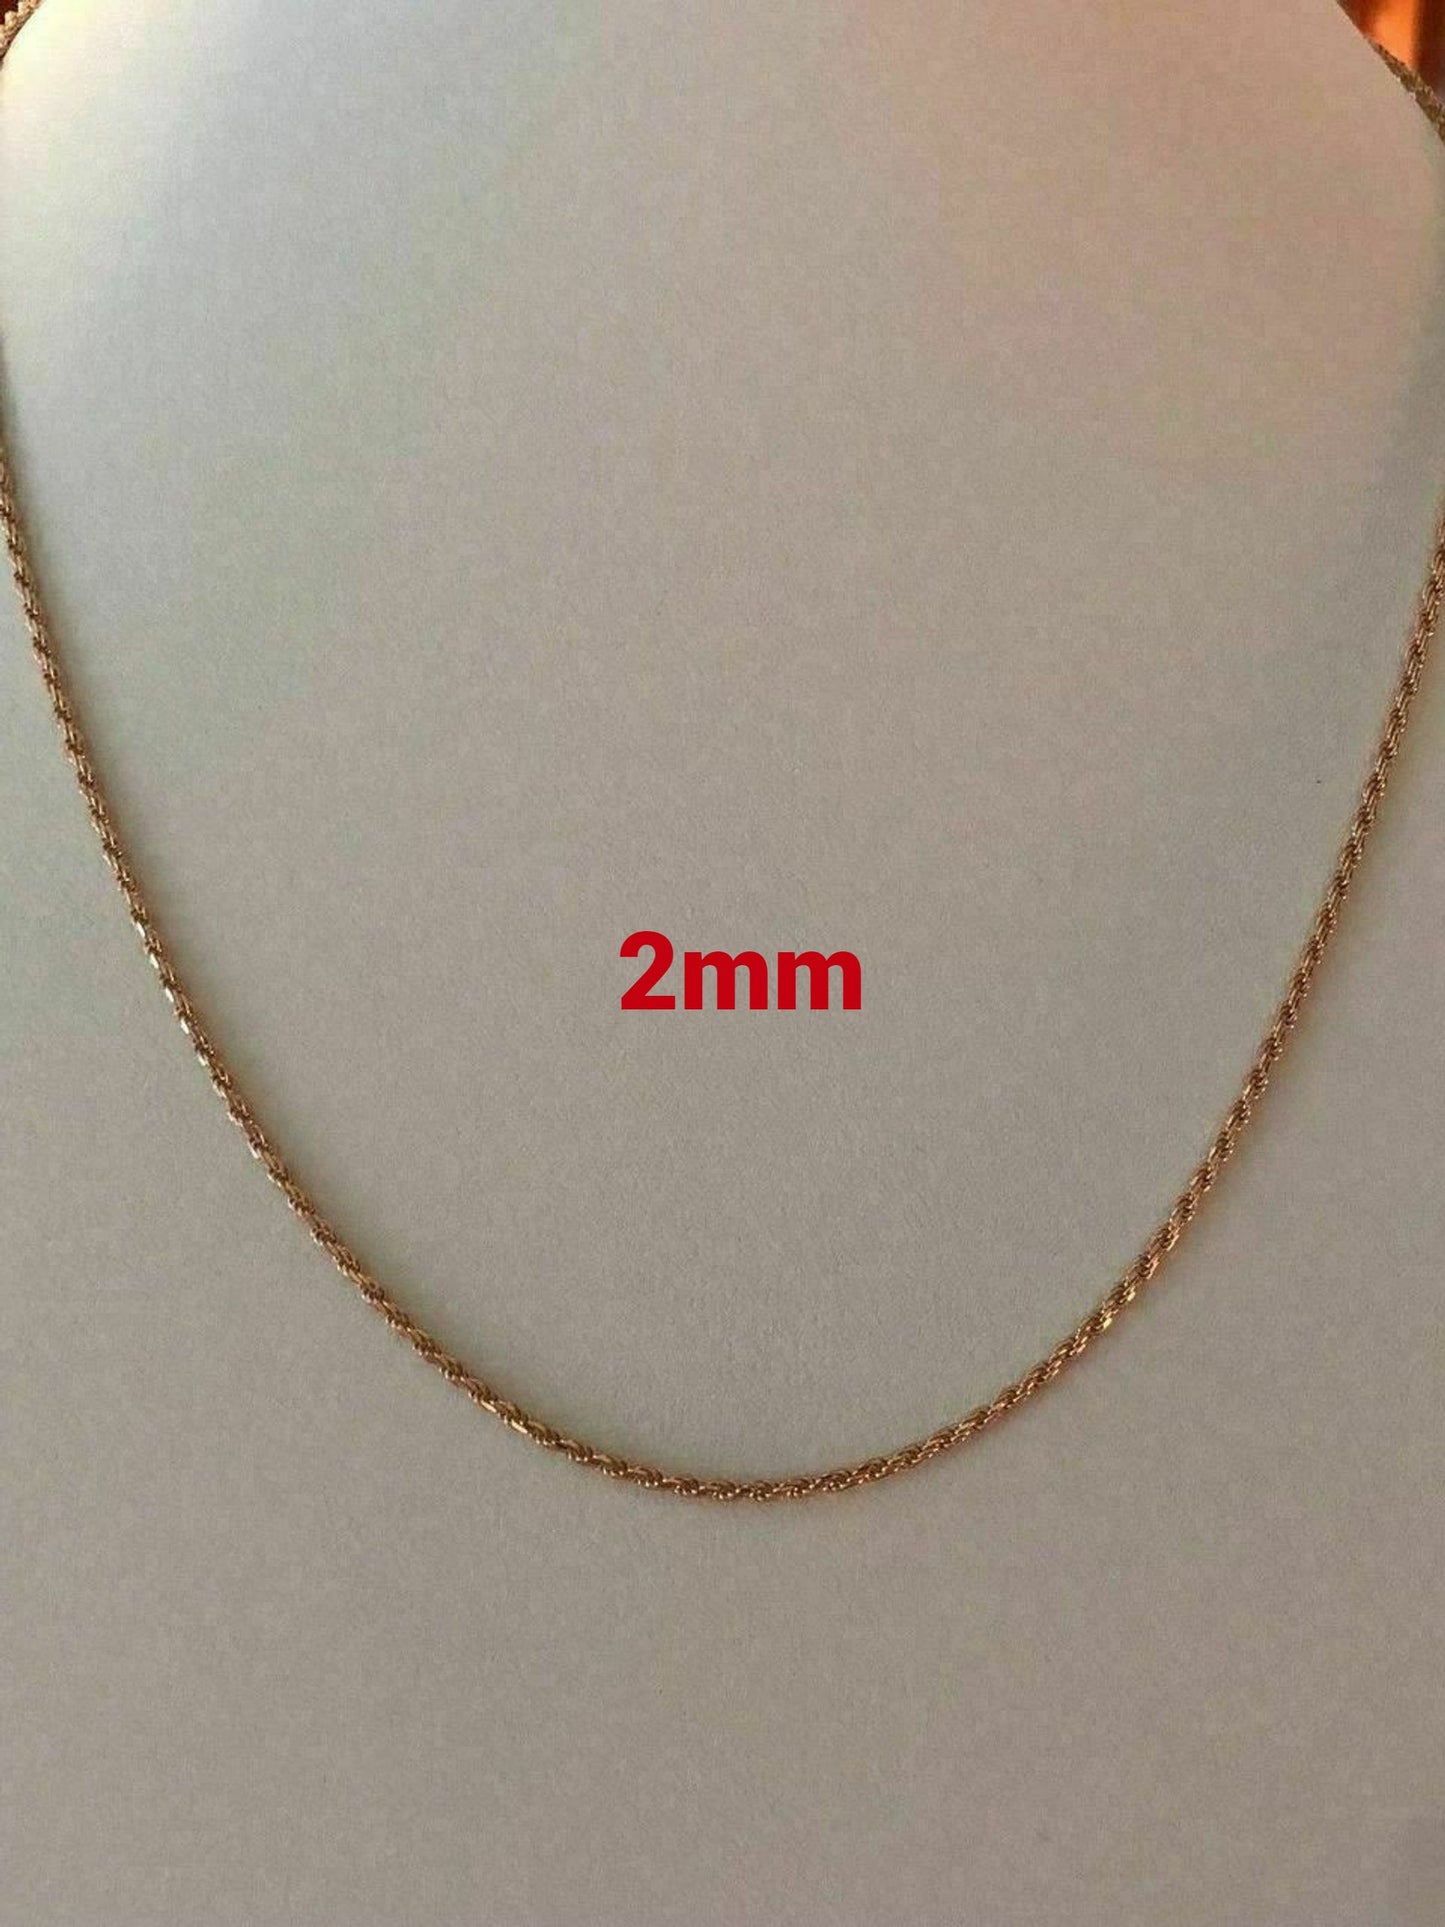 Unisex 14k Rose Gold Over Solid 925 Sterling Silver Ladies Men's Rope Chain Necklace (2mm, 5mm)